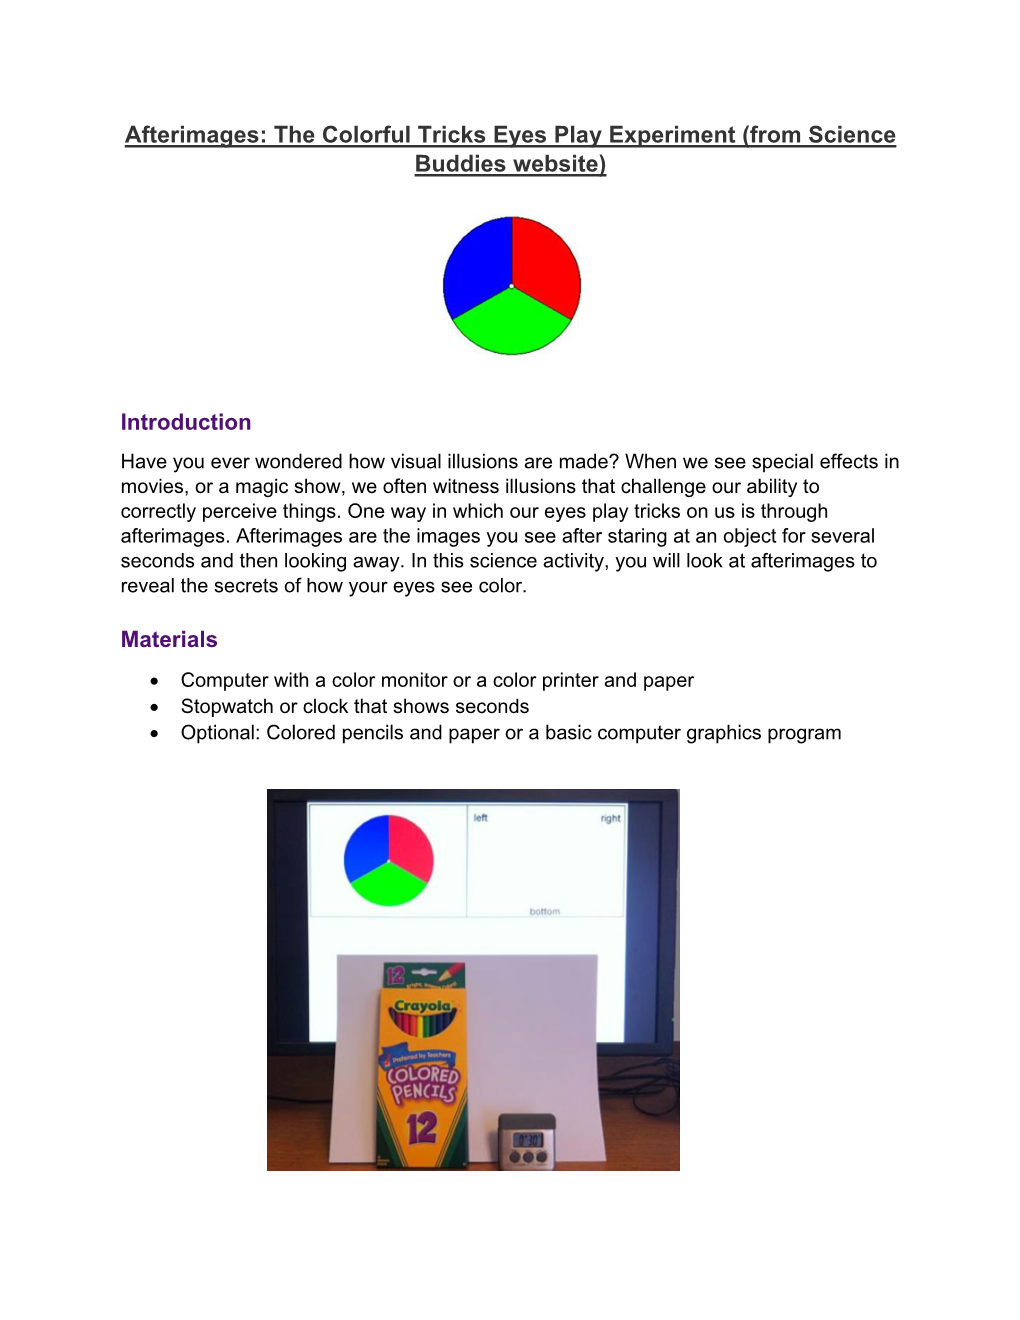 Afterimages: the Colorful Tricks Eyes Play Experiment (From Science Buddies Website)